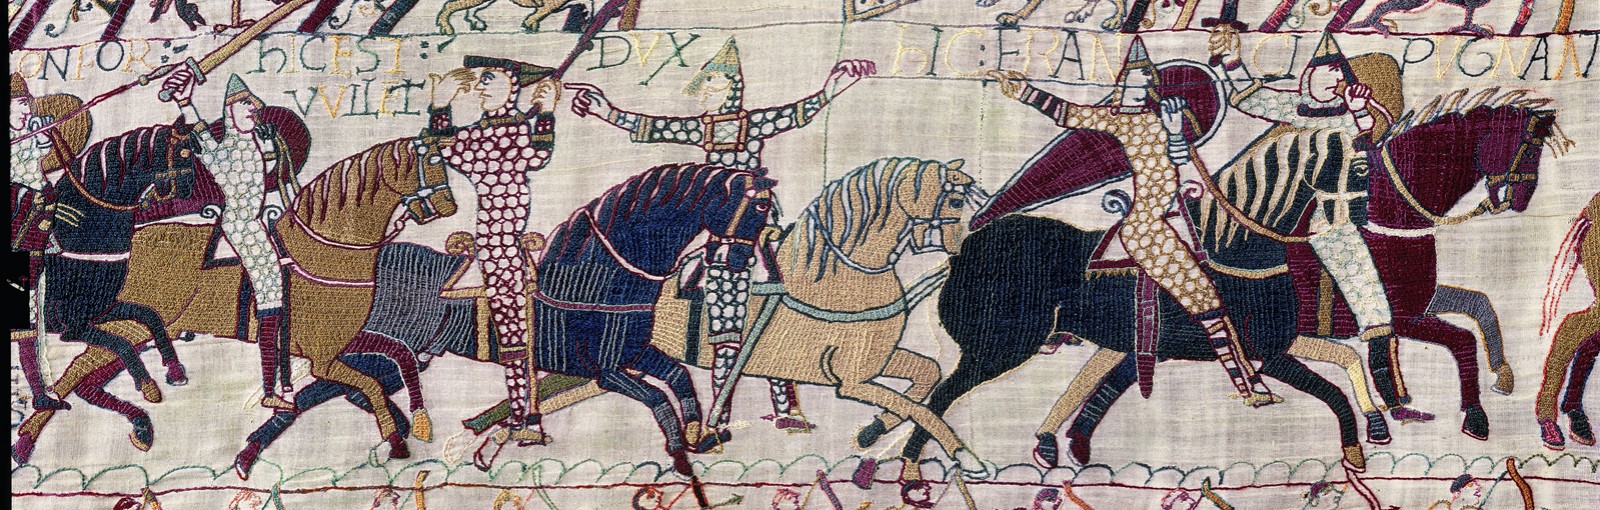 Bayeux tapestry - scene 55 - King William: see I'm alive!